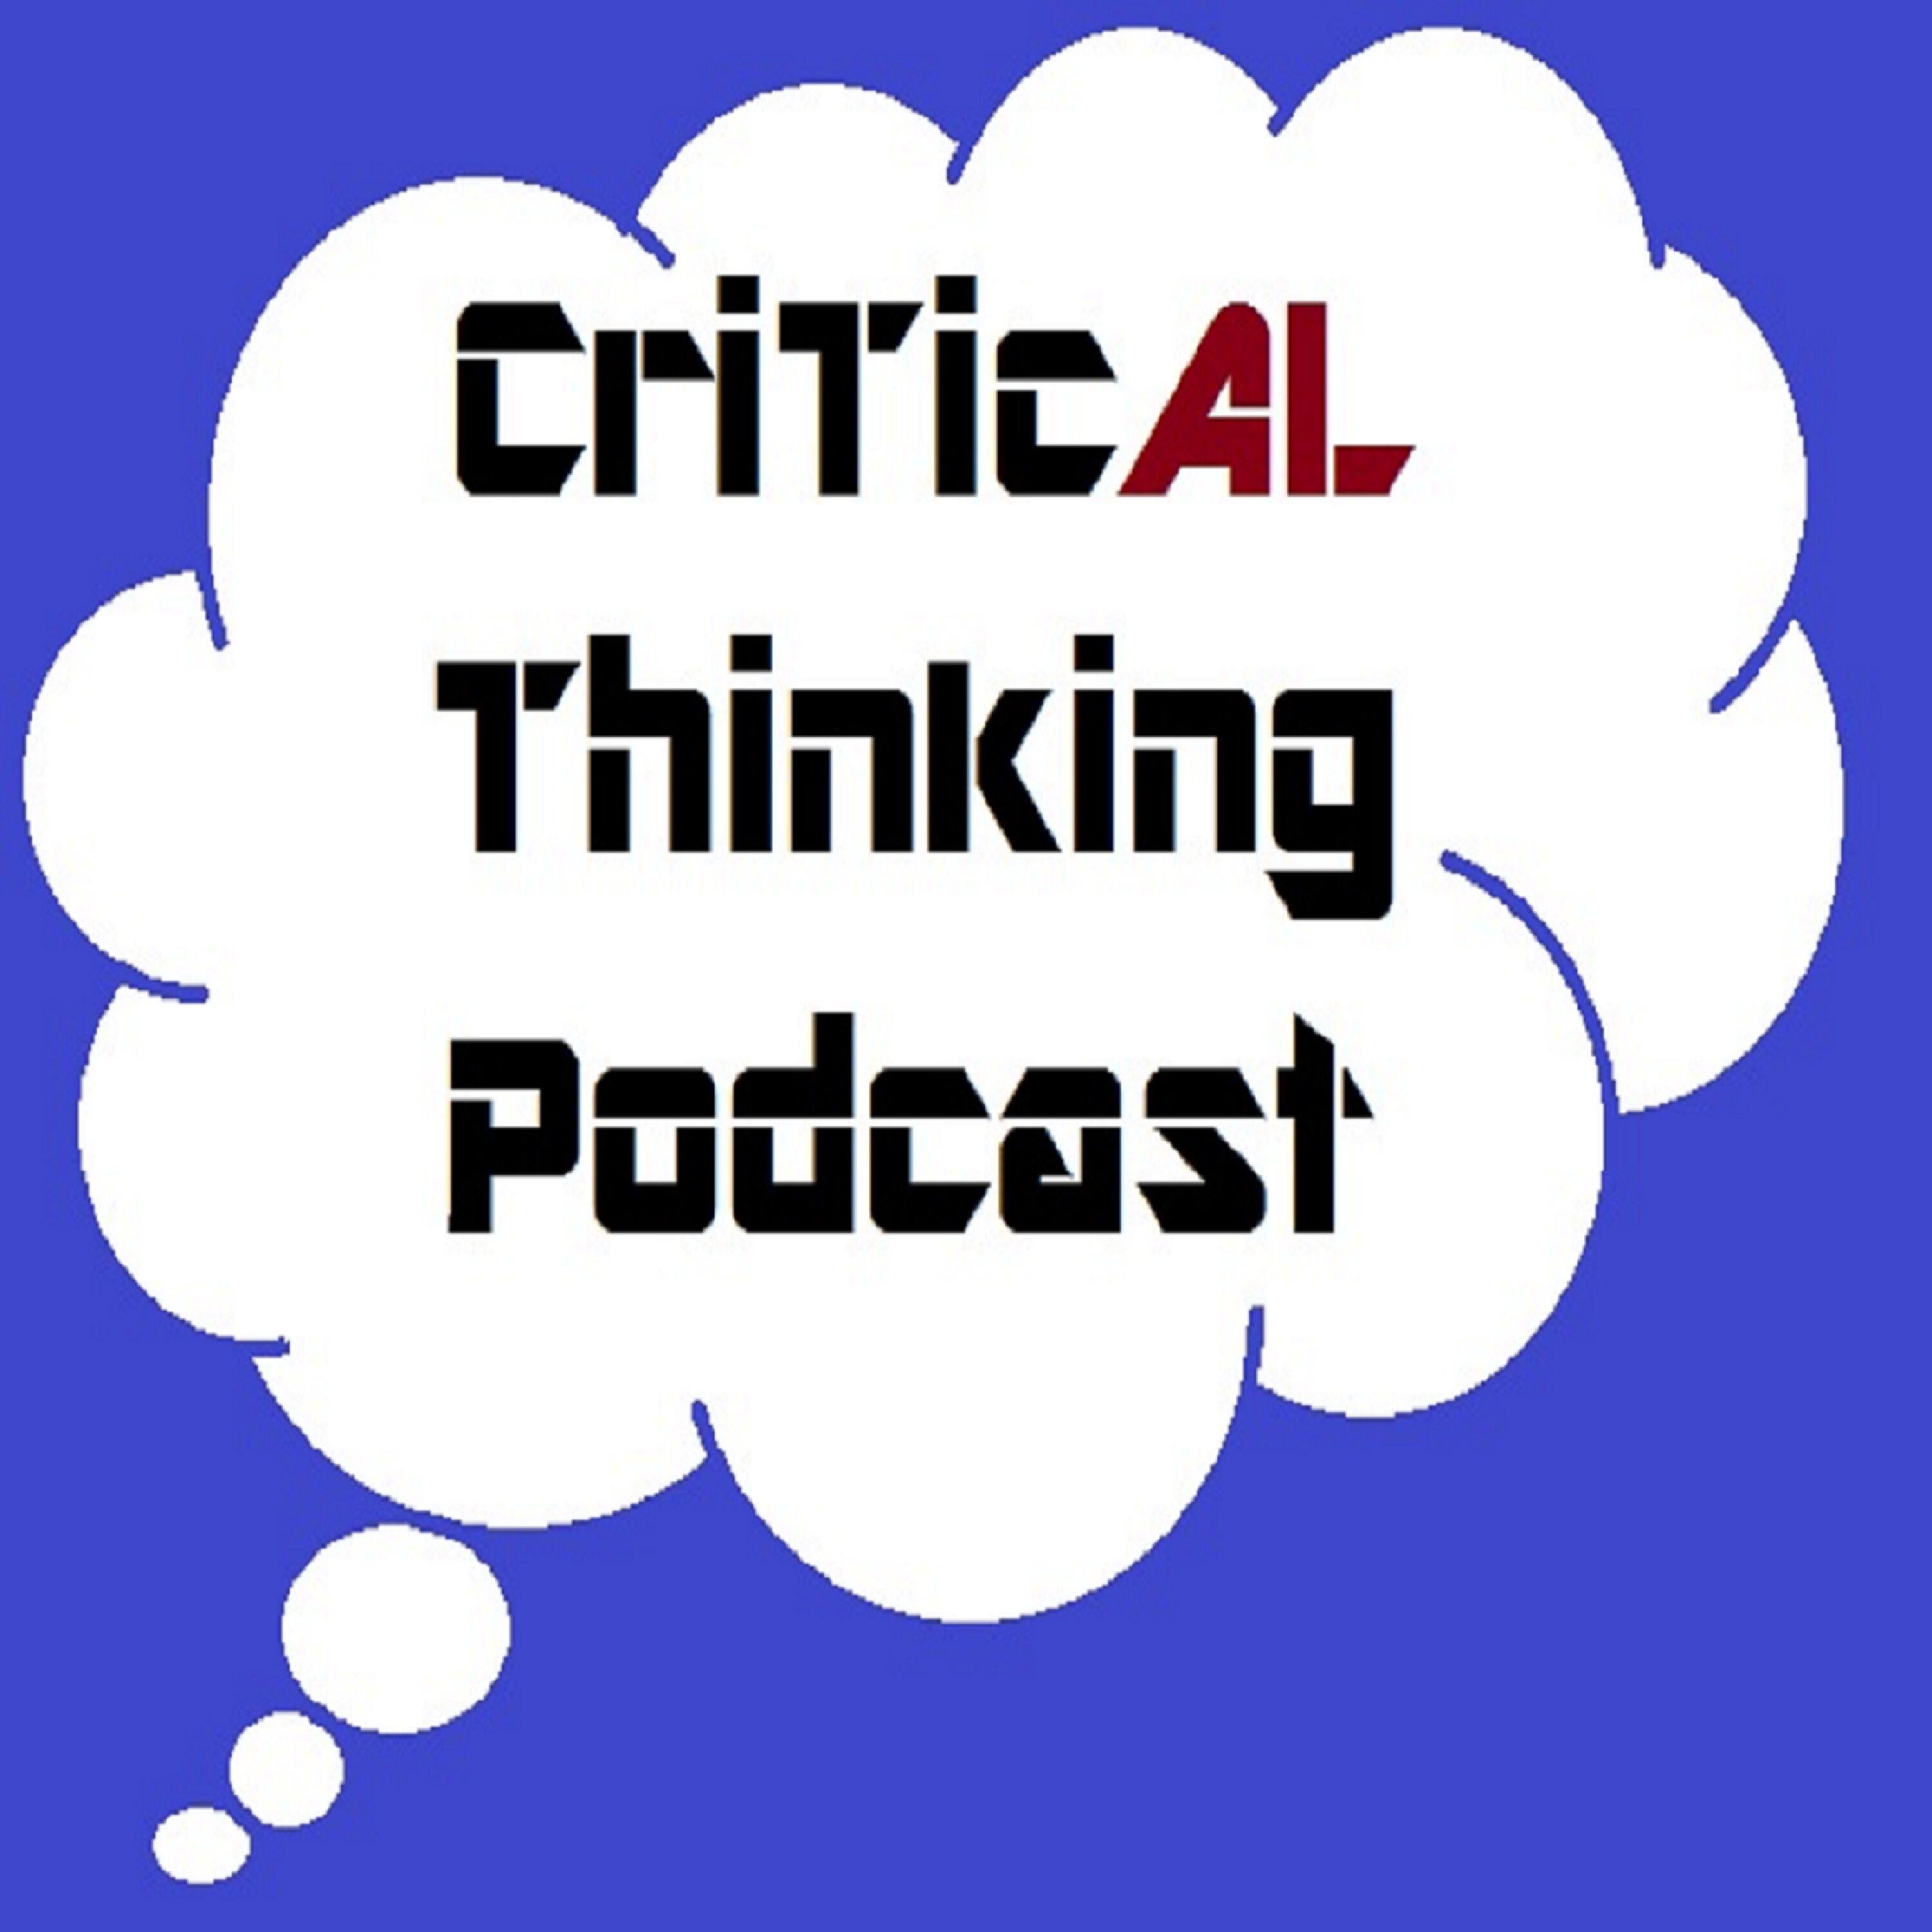 critical thinking podcasts